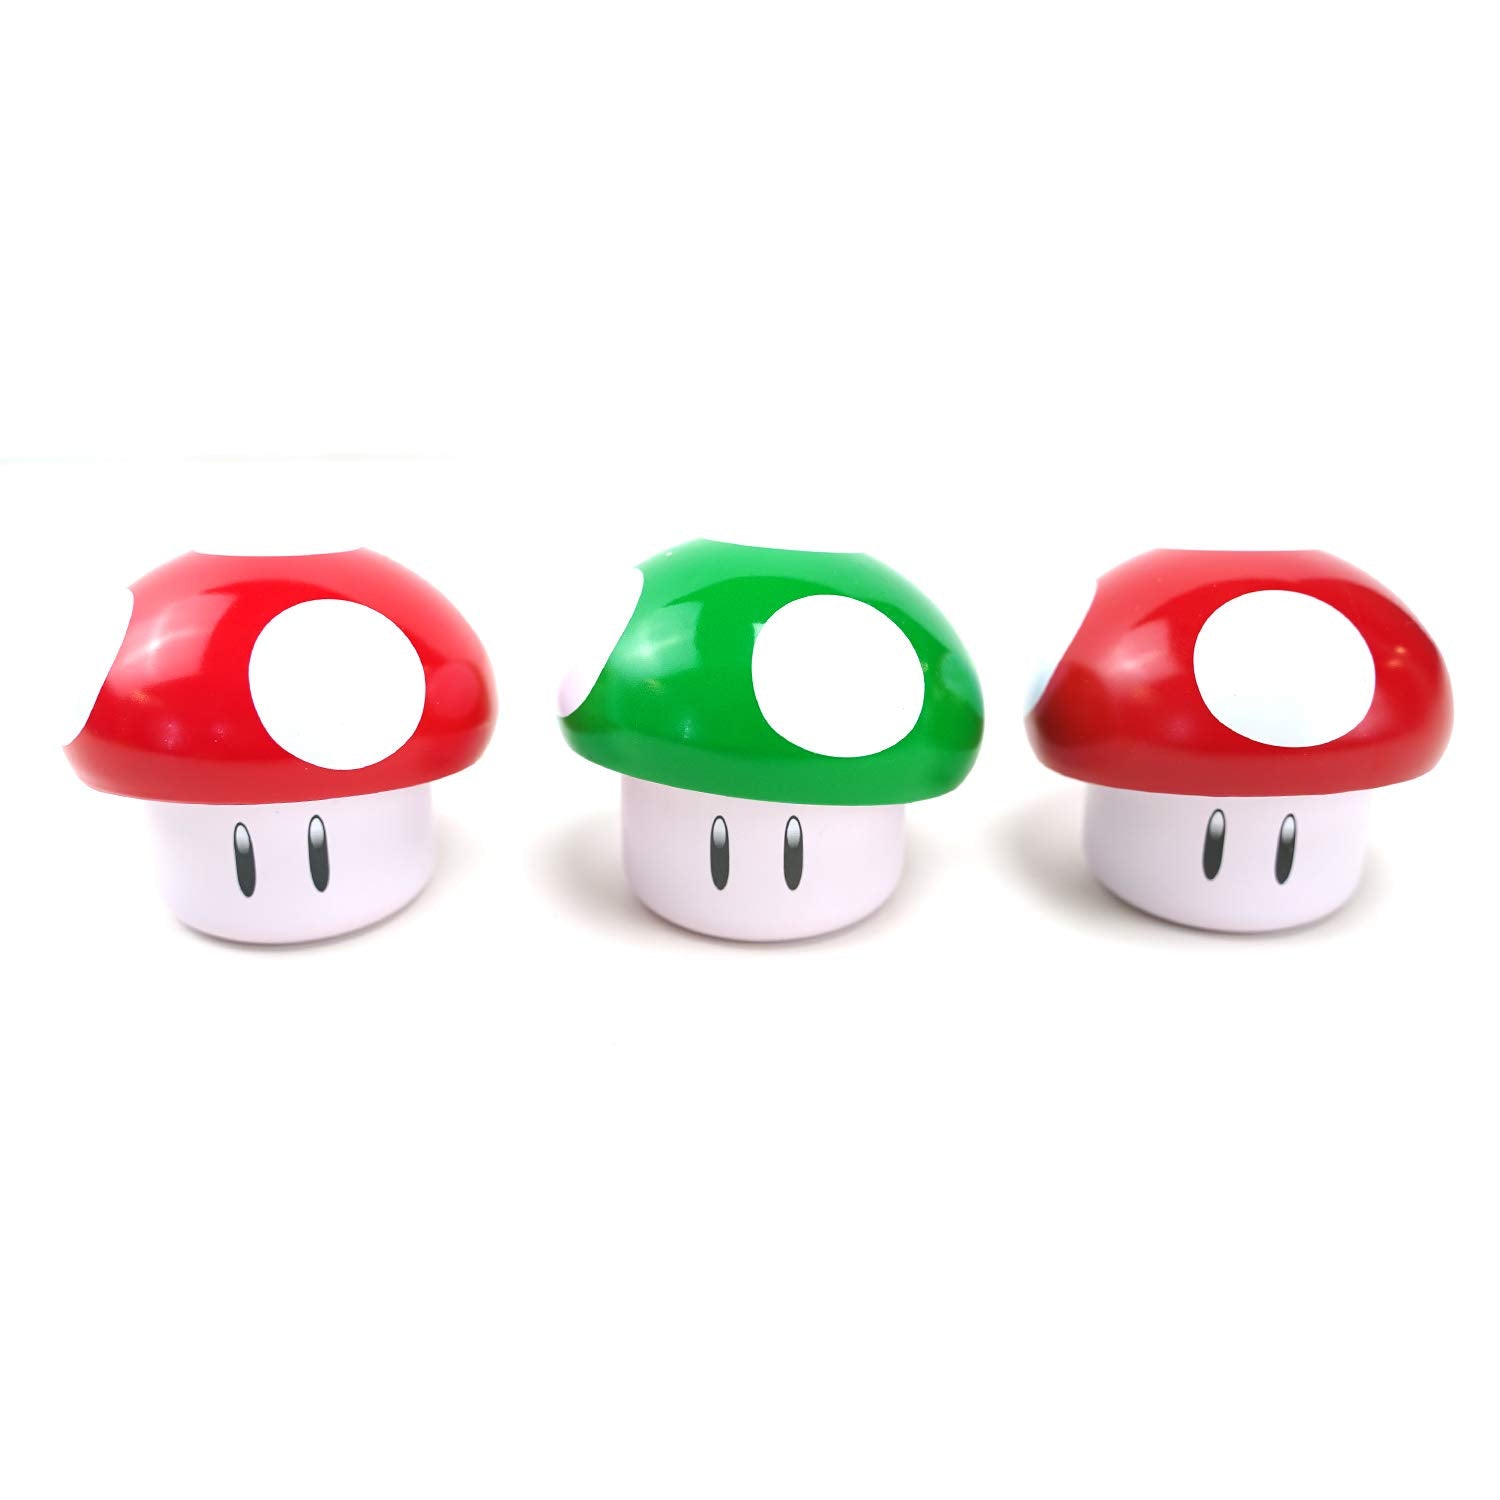 (3 pack) Nintendo Super Mario Mushroom Tin Candy Cherry and Apple Flavor Gift Stuffer with 2 GosuToys Stickers